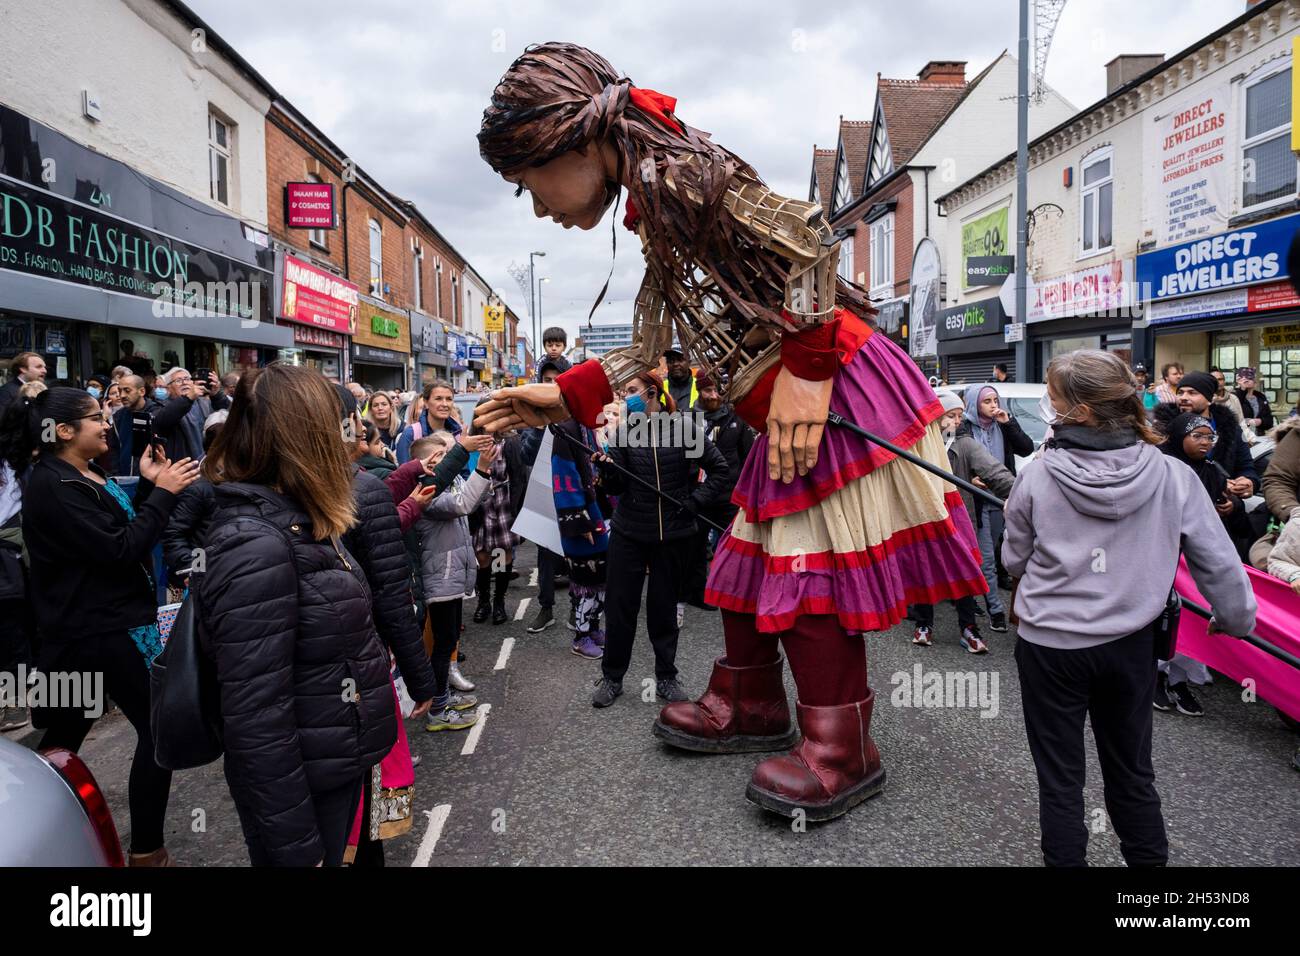 Little Amal delights crowds of onlookers as she walks along the High Street in Erdington on 28th October 2020 in Birmingham, United Kingdom. Little Amal is a 3.5 metre-tall puppet and living artwork of a young Syrian refugee child who has spent the last 3 months walking 8000 km from the boarder of Syria across Turkey, Greece, Italy, France, Switzerland, Germany, Belgium and the UK to focus attention on the urgent needs of young refugees. Stock Photo